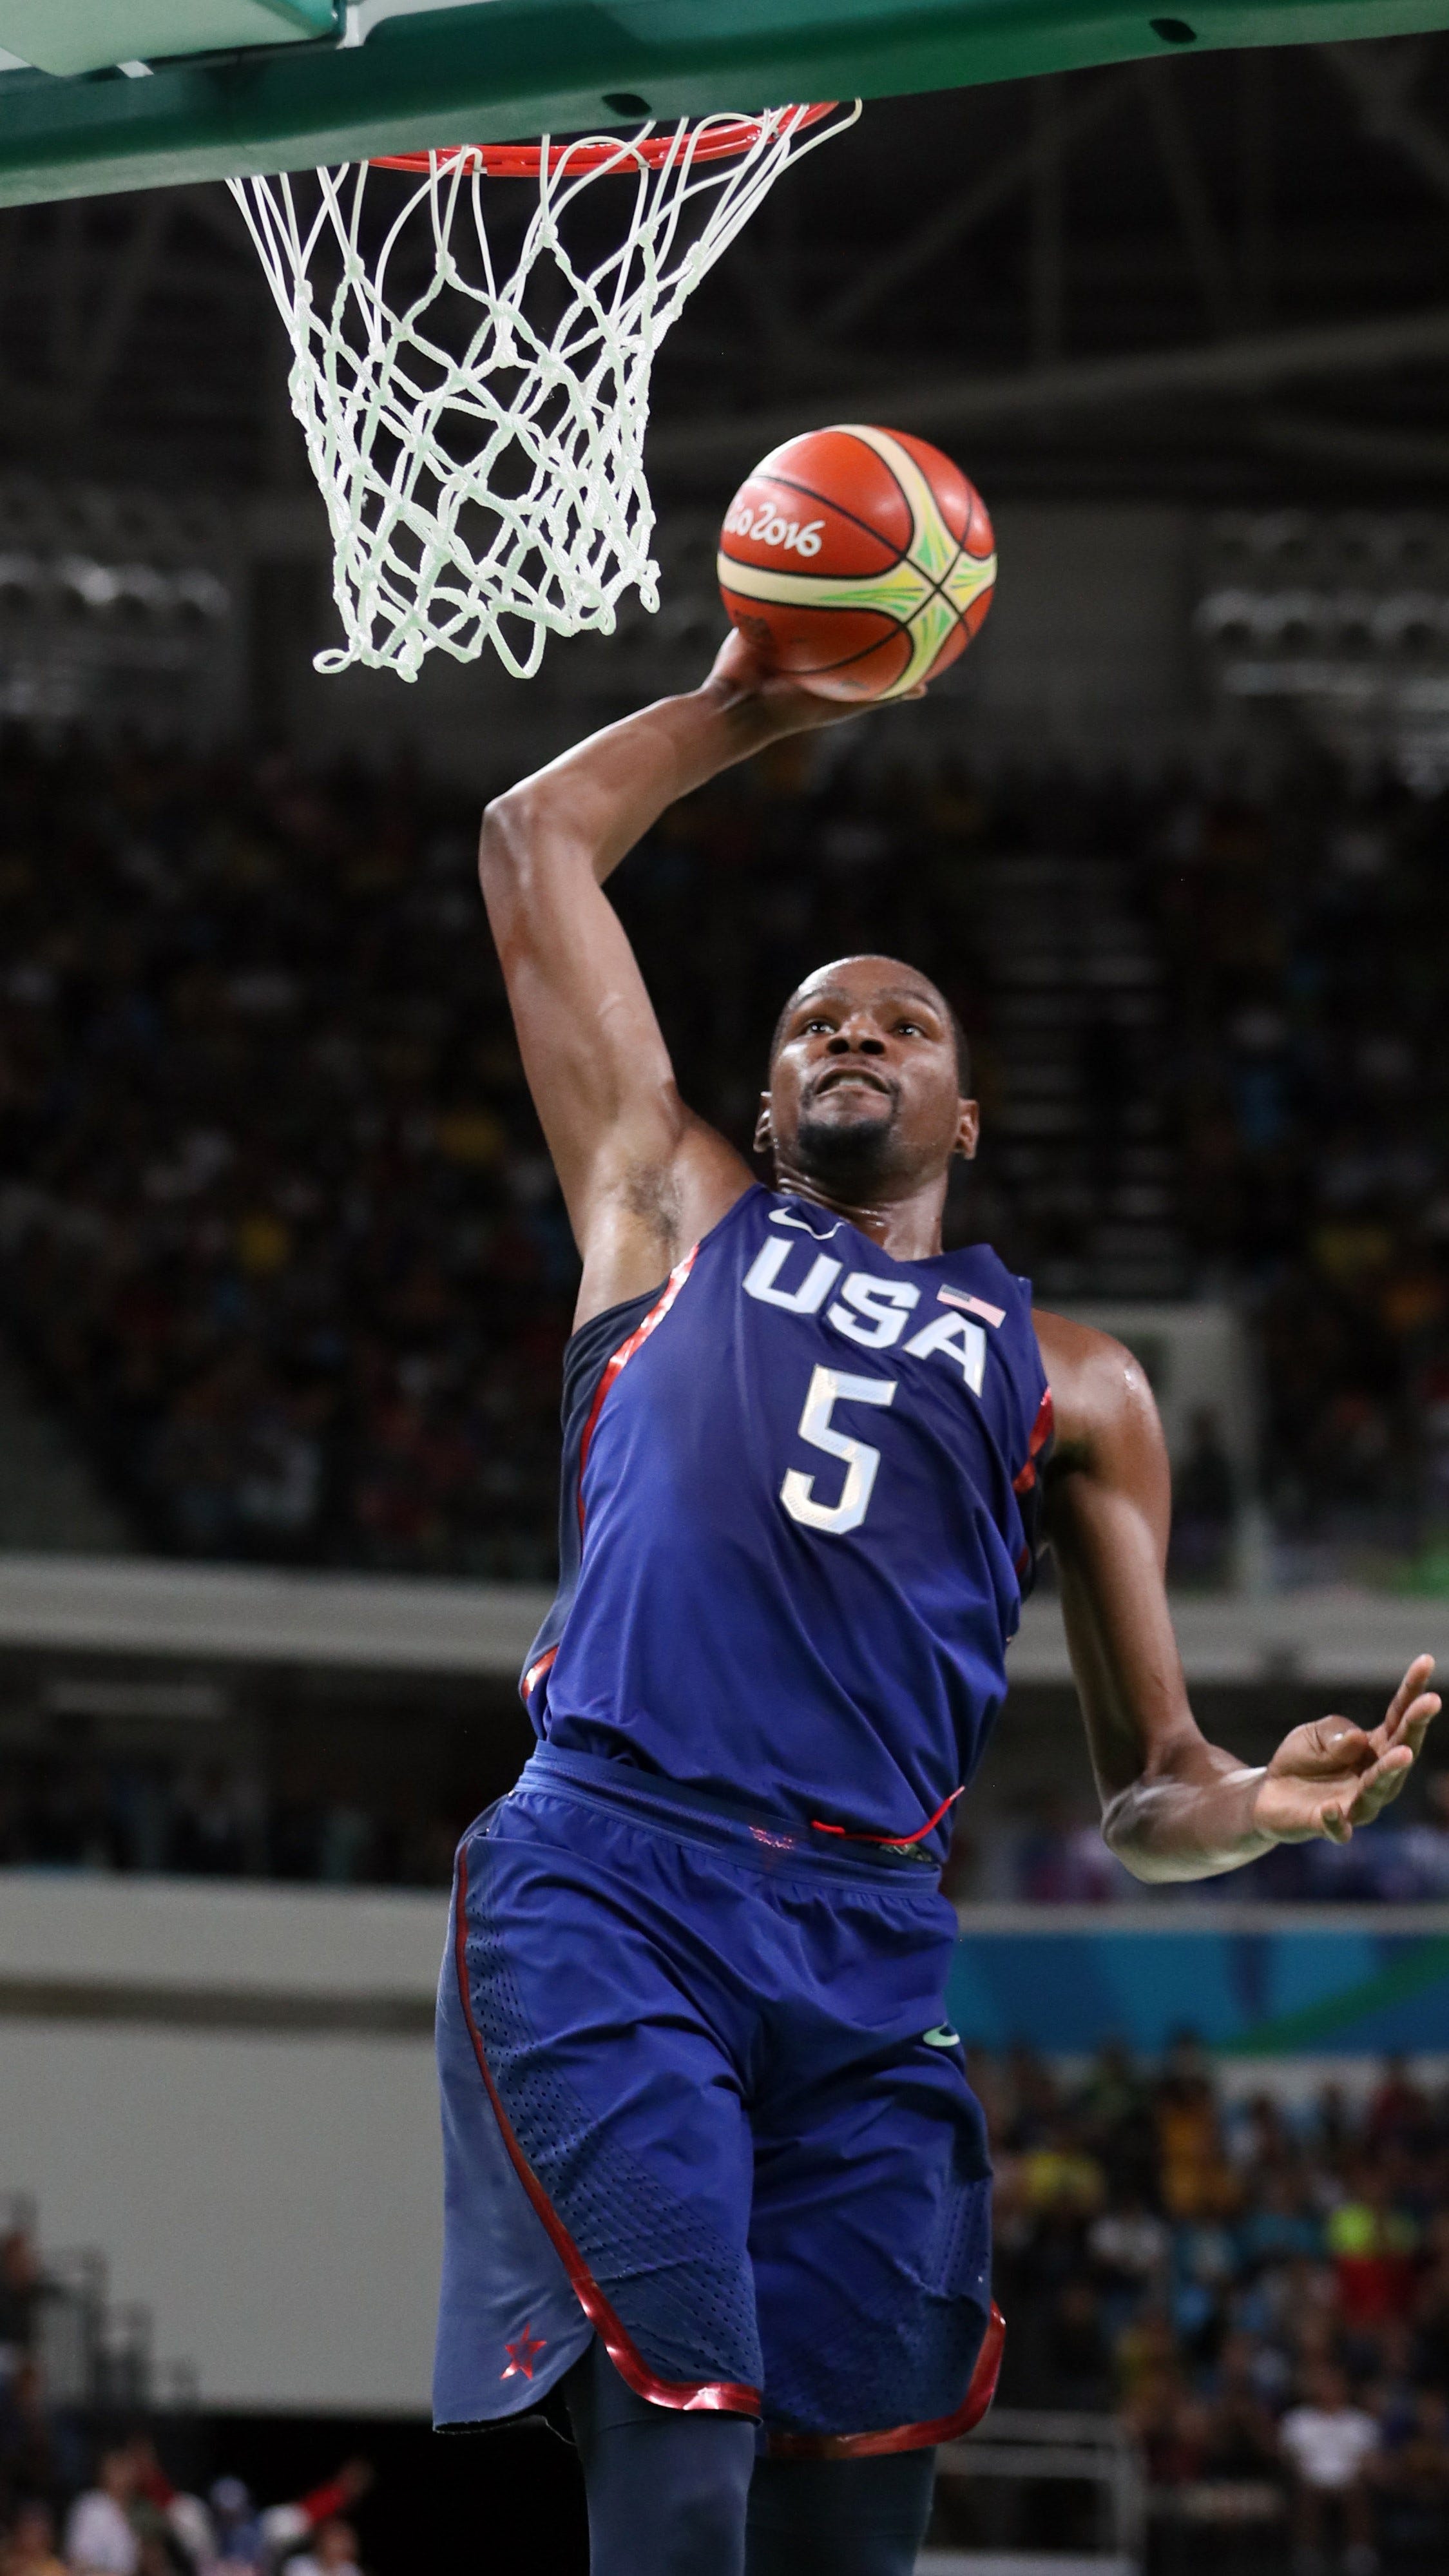 USA Olympic Basketball Team 2012: Roster, Complete Schedule and